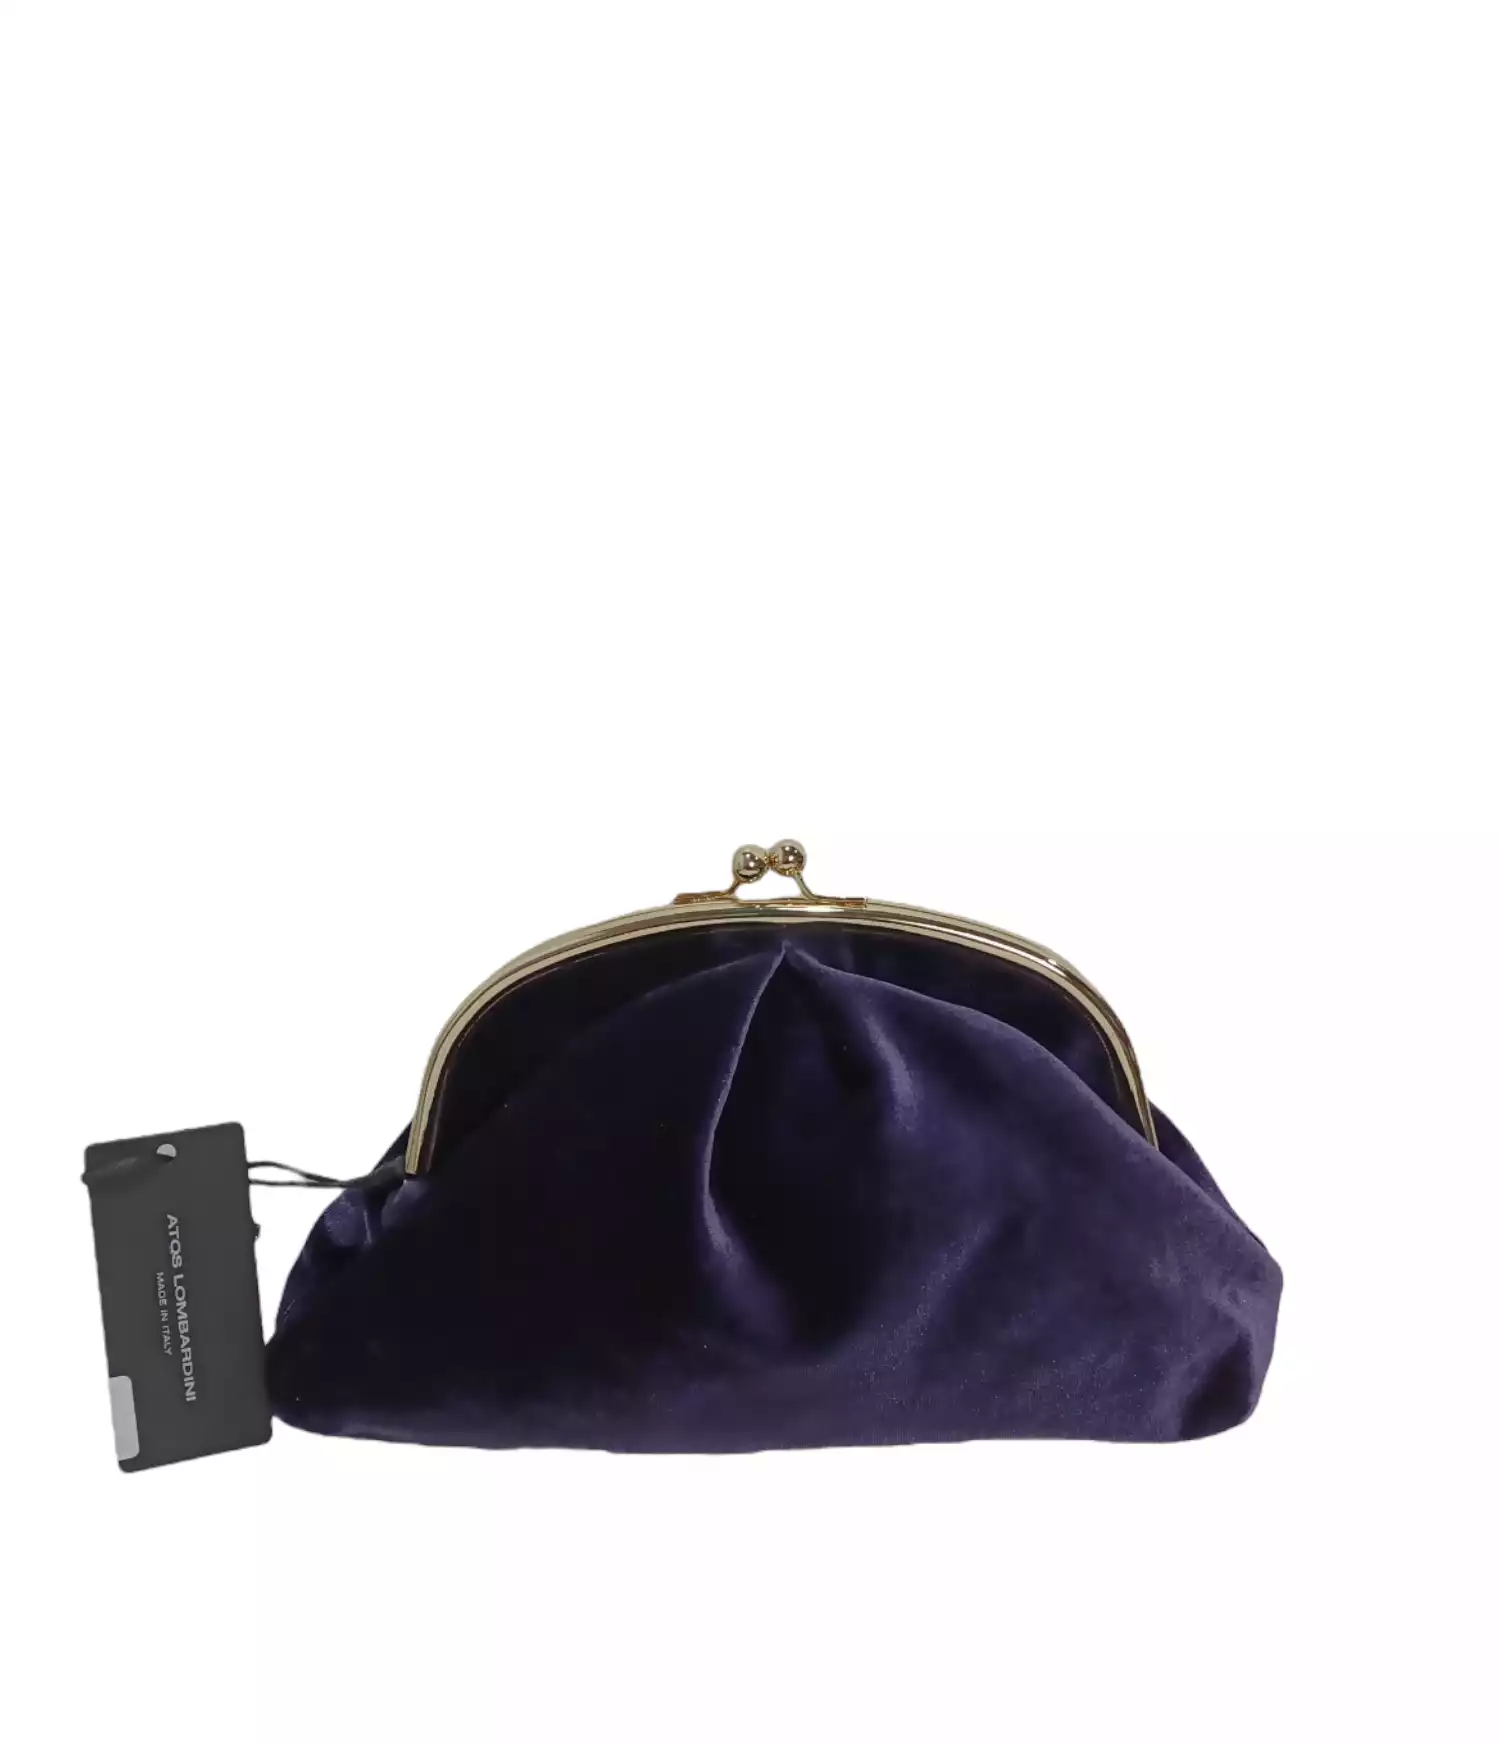 Clutch bag by Atos Lombardini